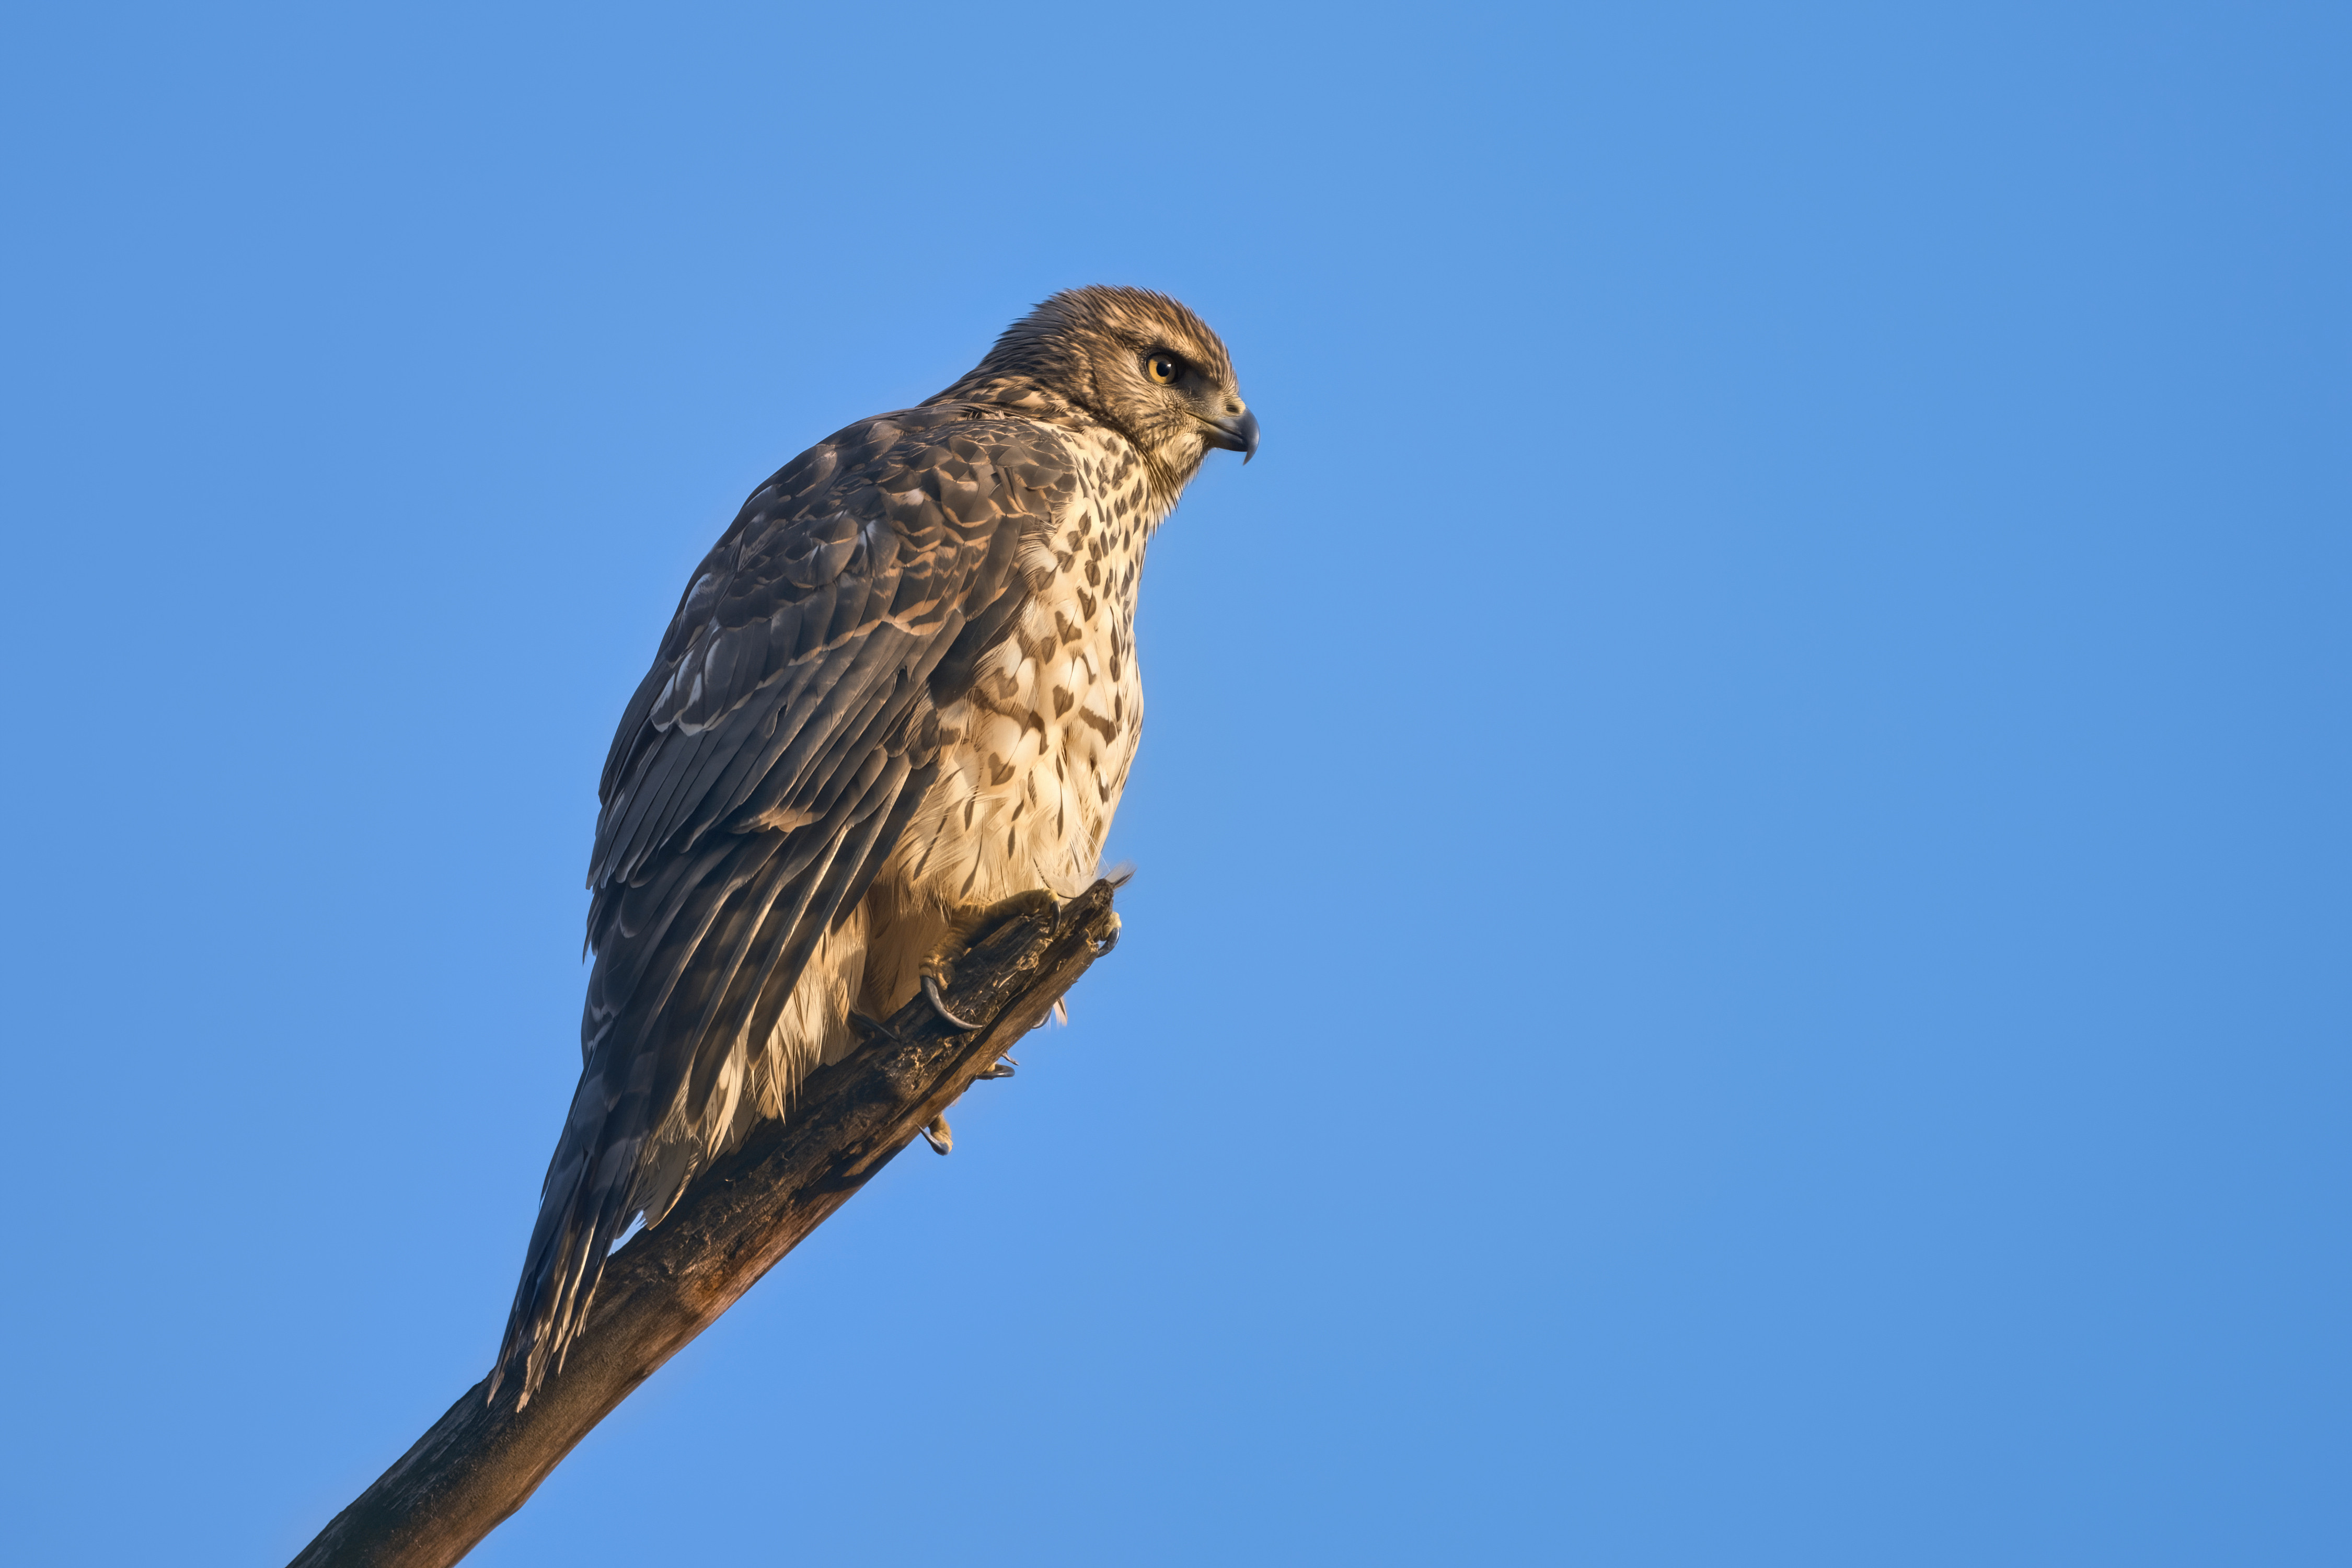 A hawk sits on a branch against a blue sky